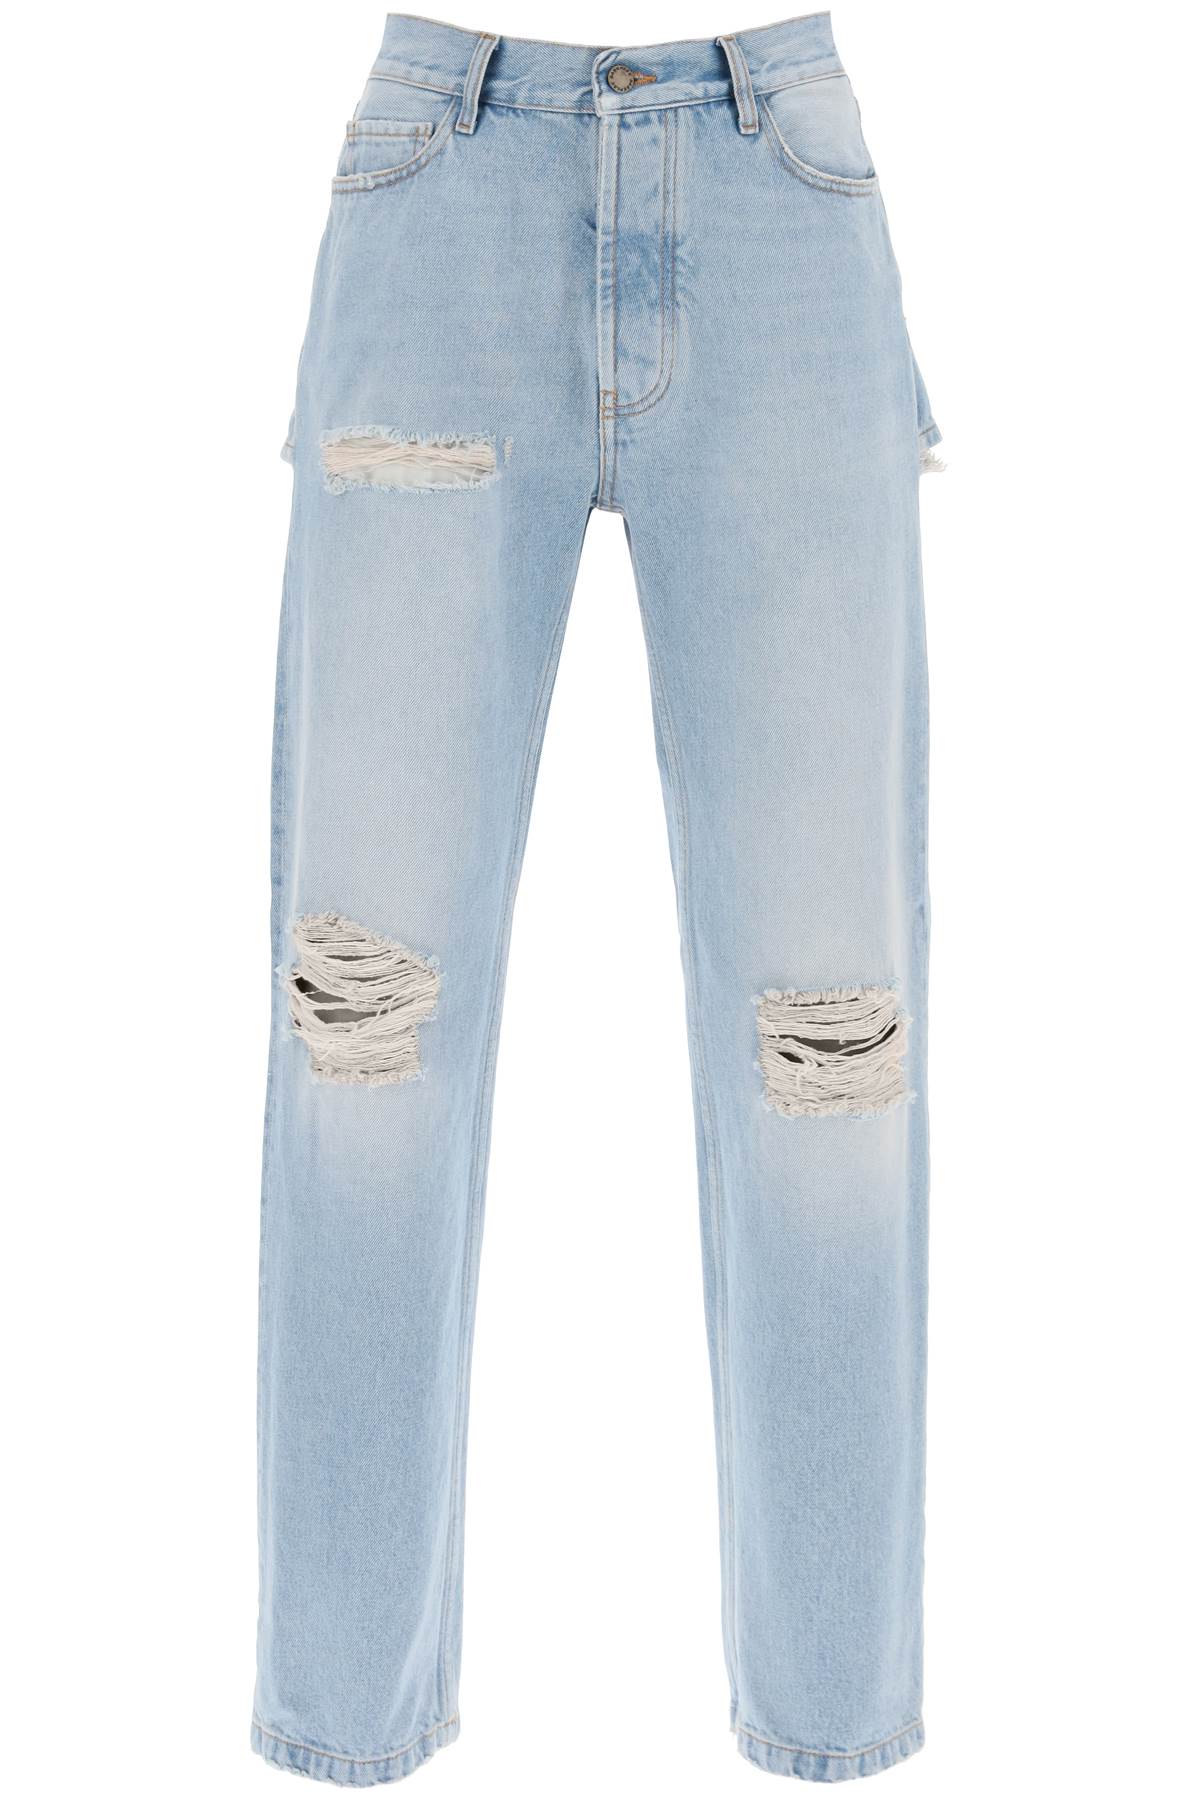 Naomi Jeans With Rips And Cut Outs